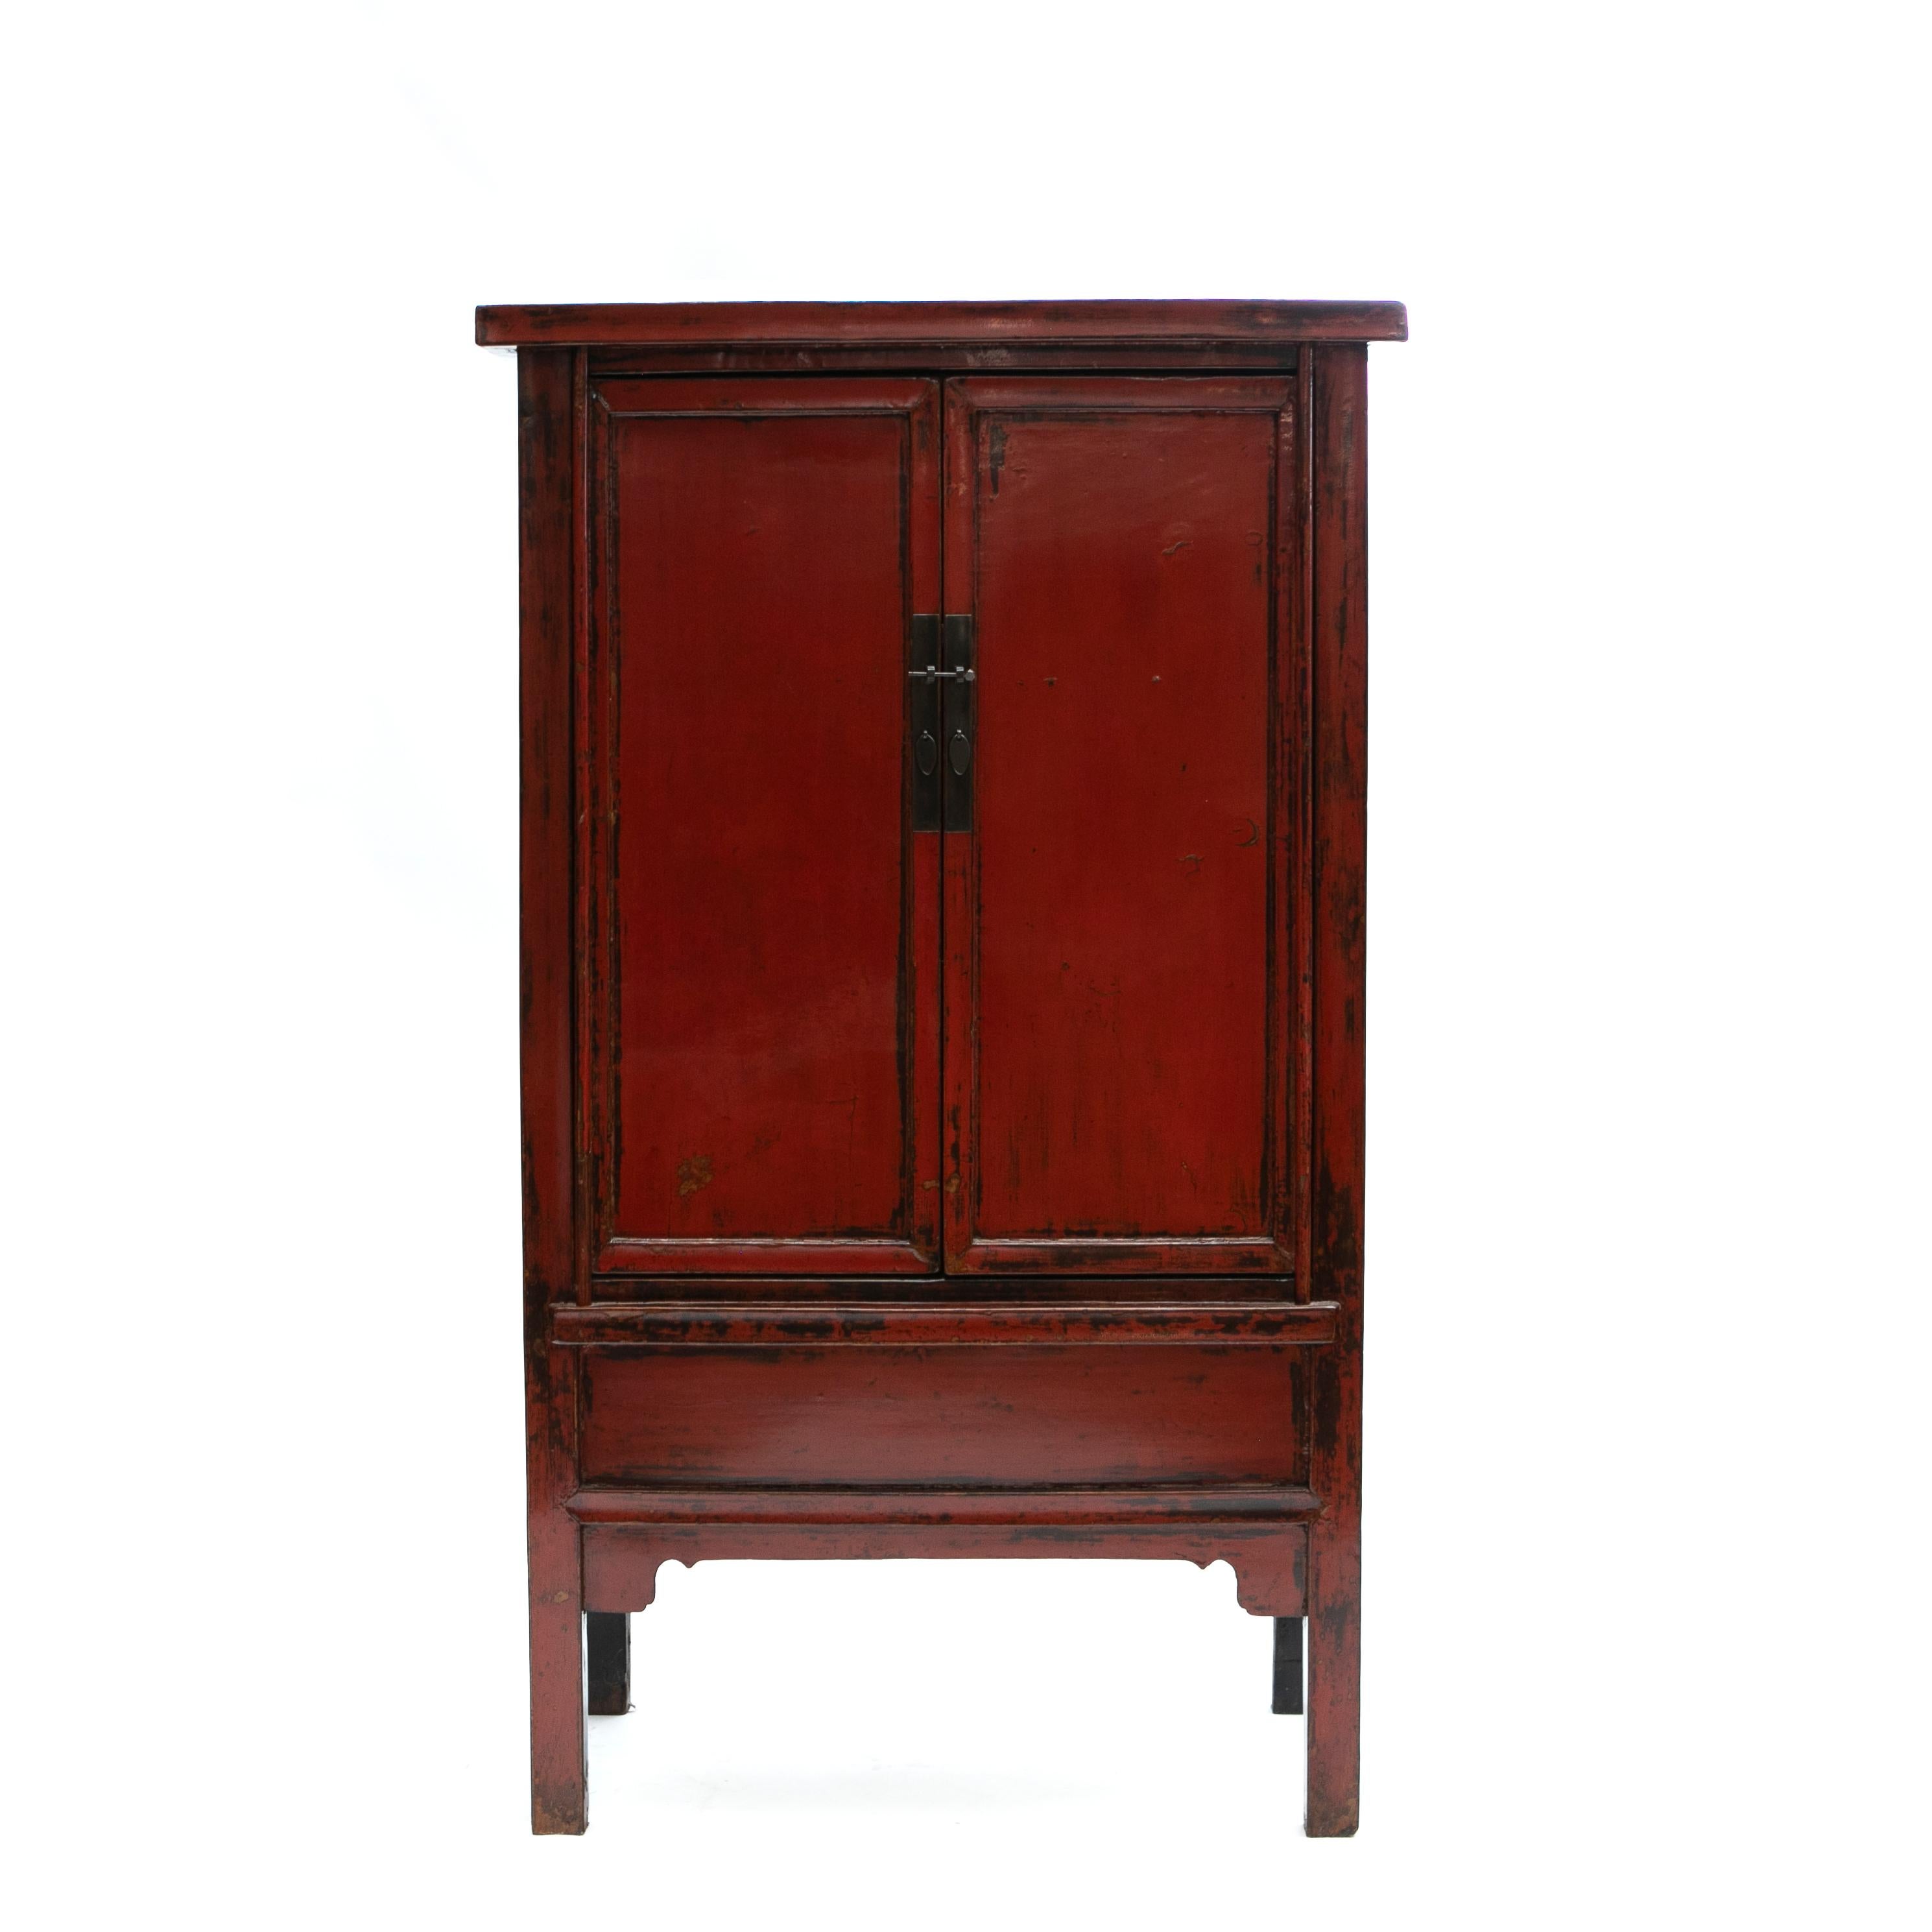 A stunning and pair of Chinese early 19th century cabinets features a red lacquer front contrasted by black lacquer sides.
Each cabinet showcases a pair of doors that open thanks to a metal lock to reveal inner shelves and a lower compartment